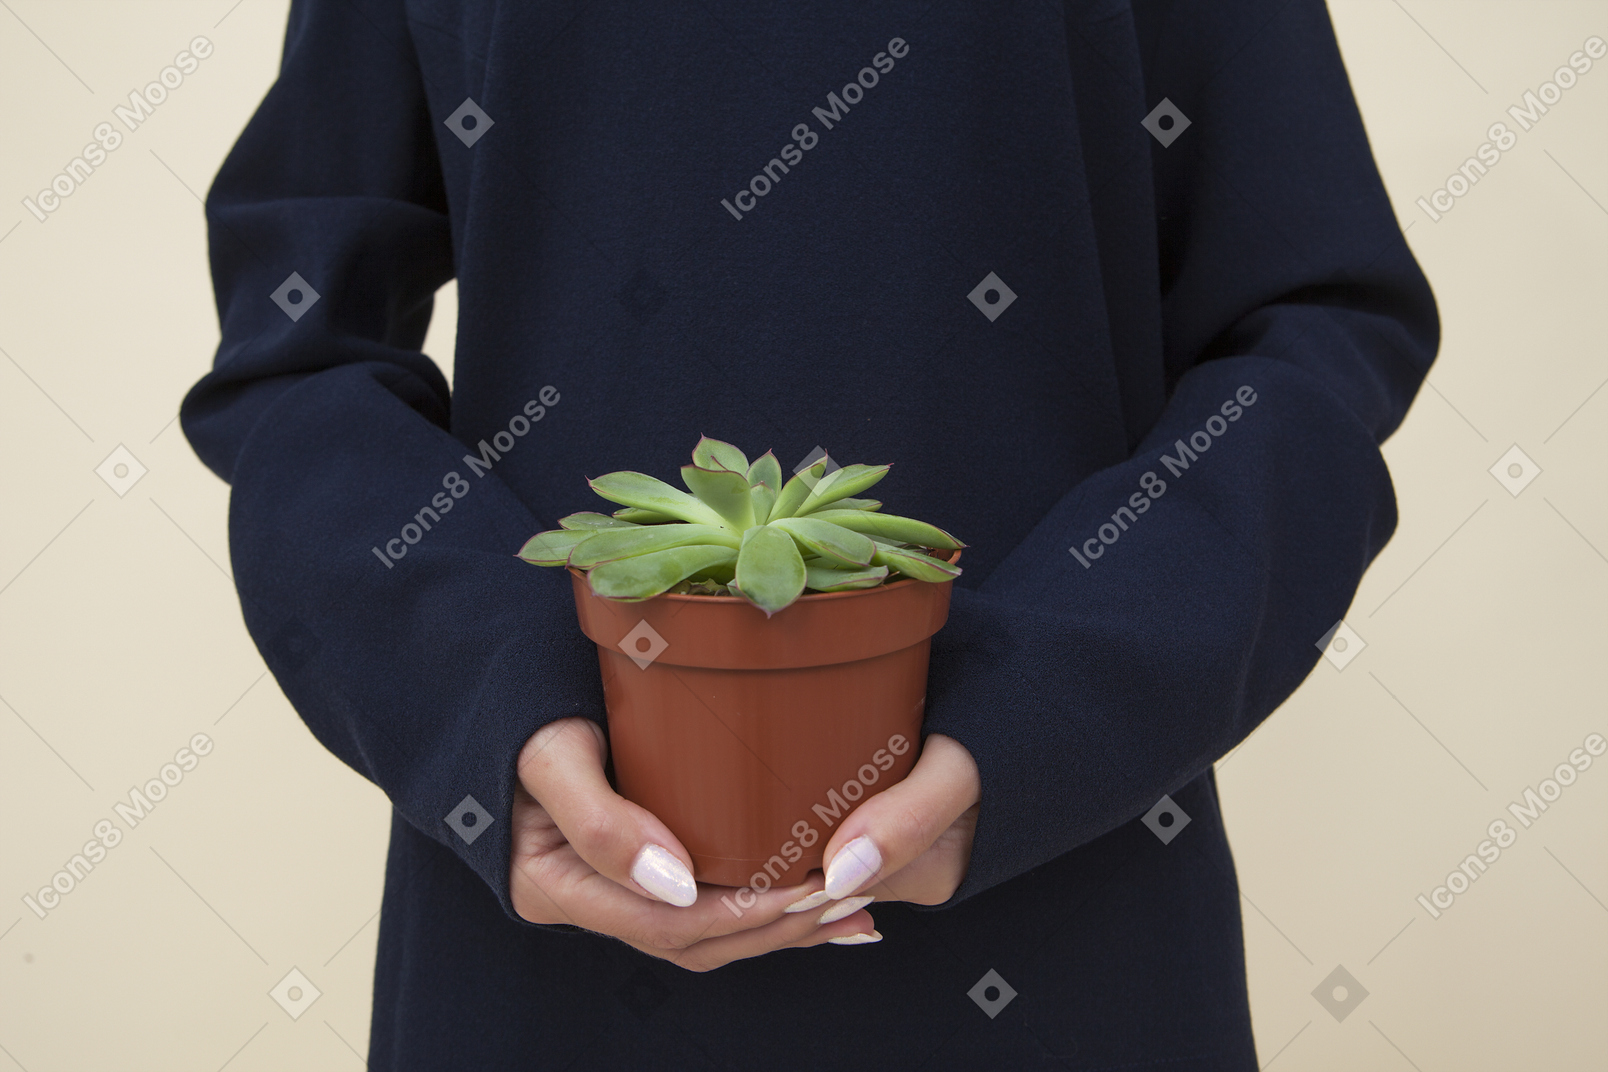 Female hands holding plant in brown pot